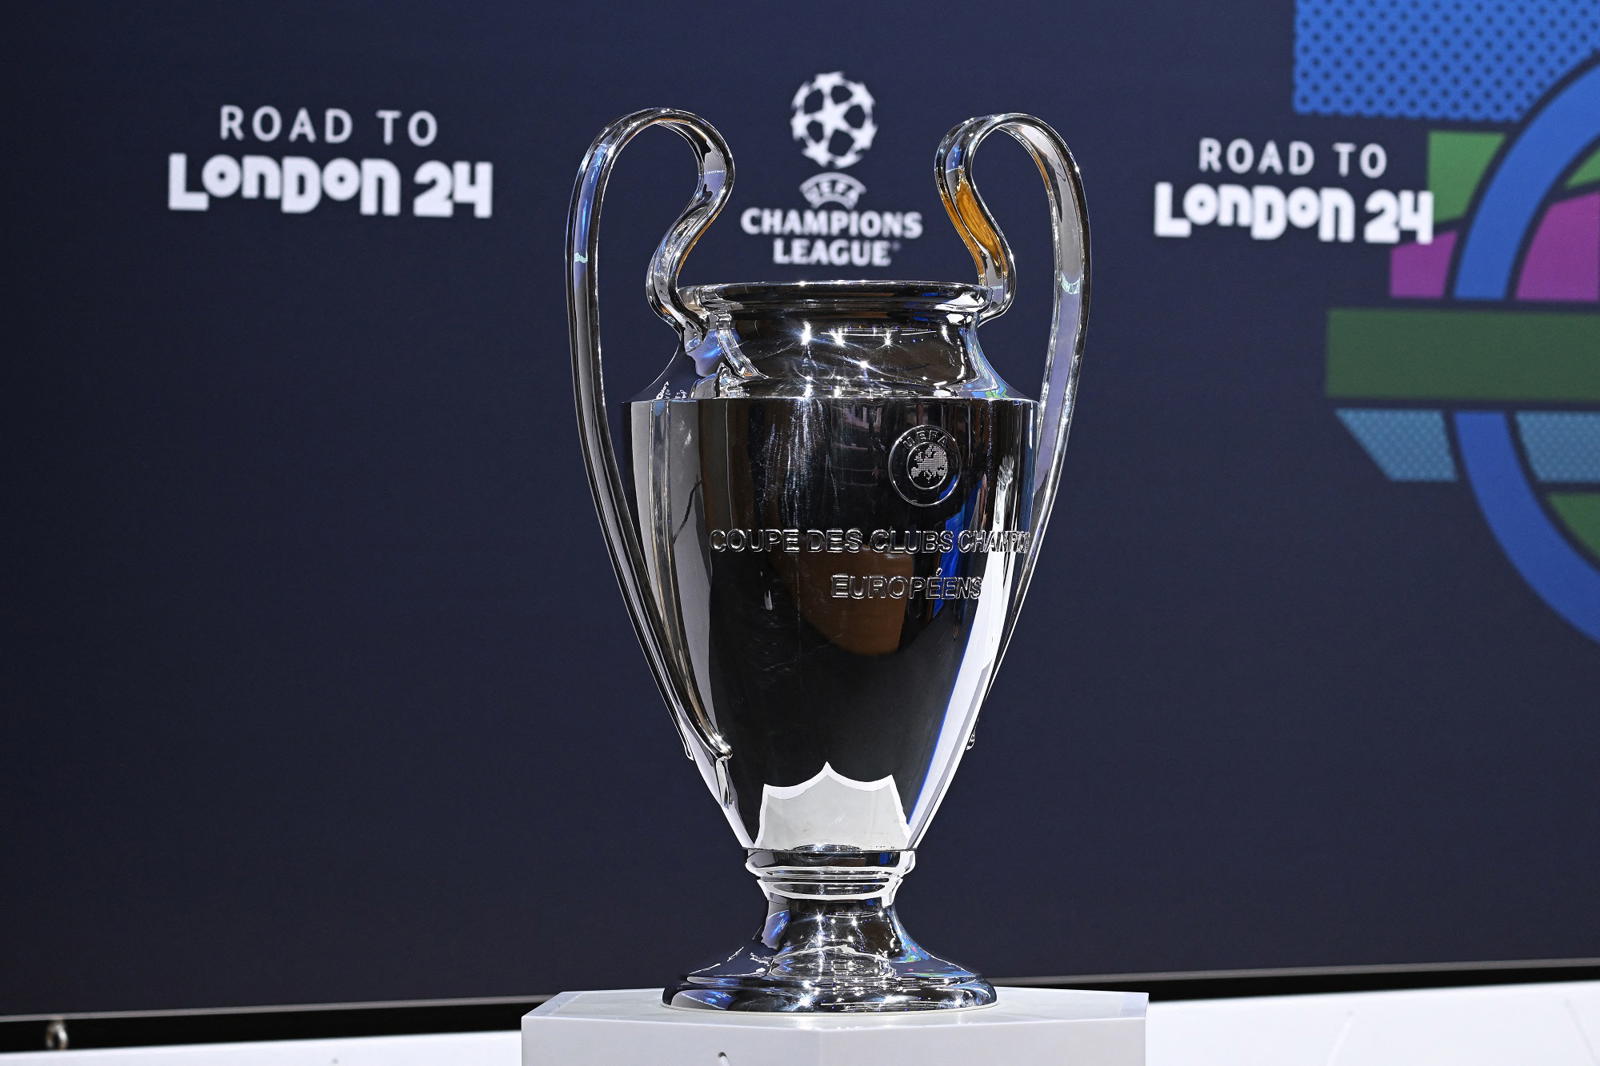 Champions League News - Latest News and Updates Today